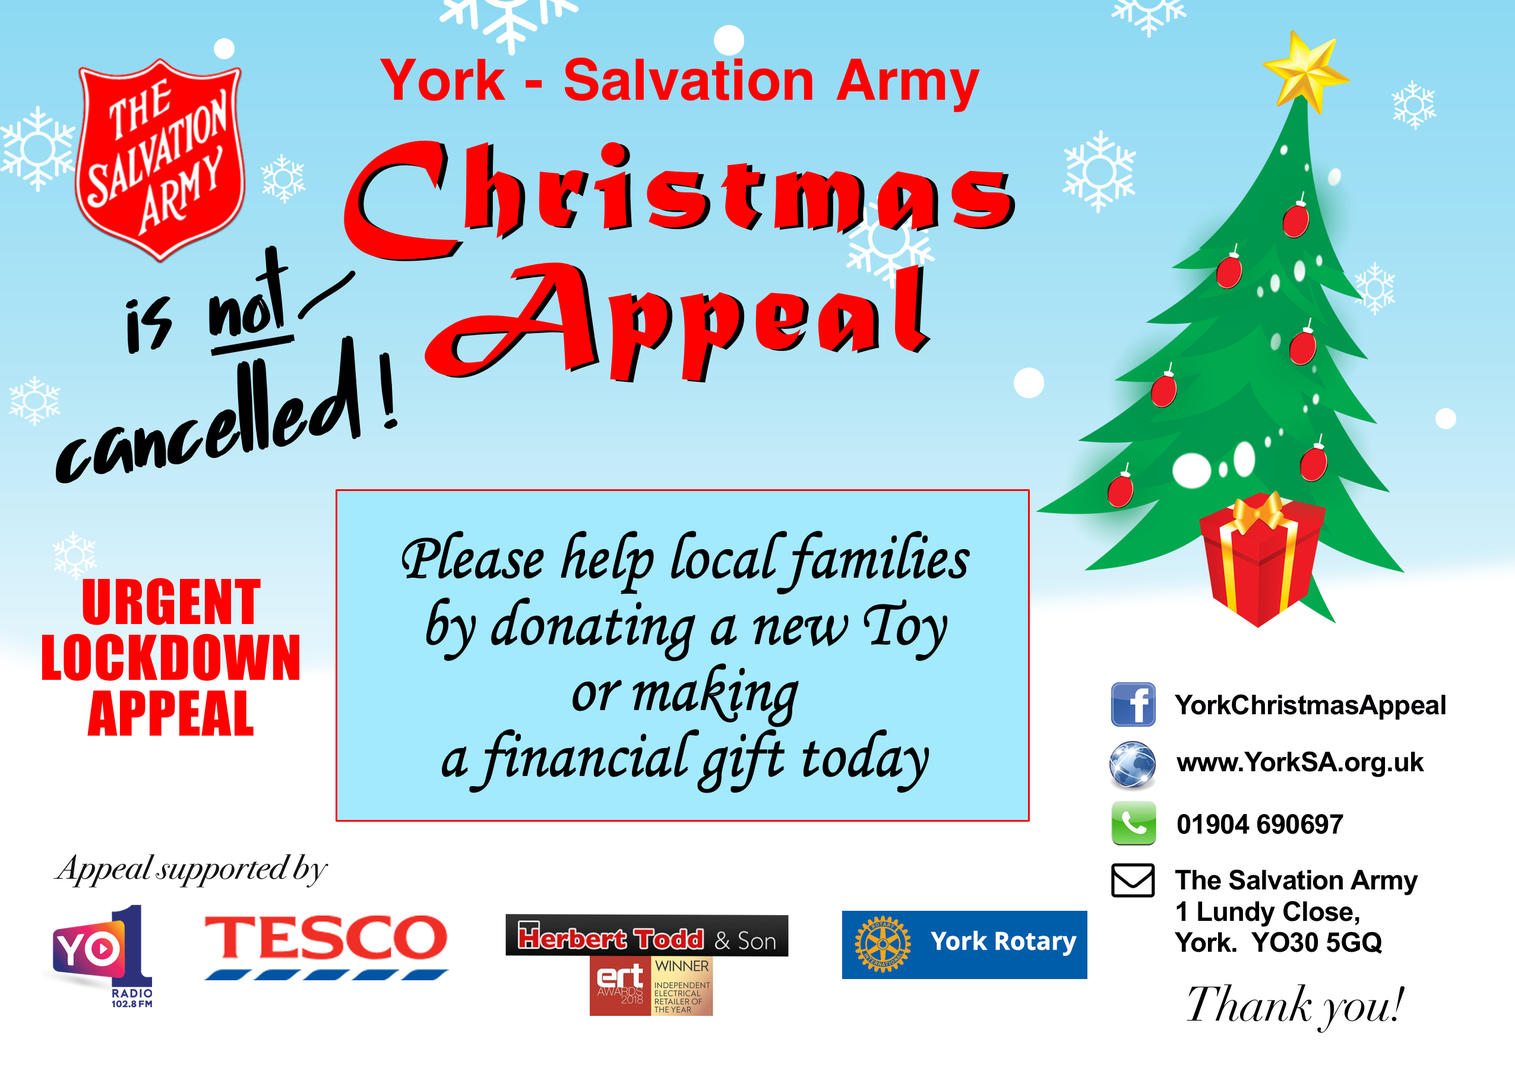 The Salvation Army Christmas Appeal 2020